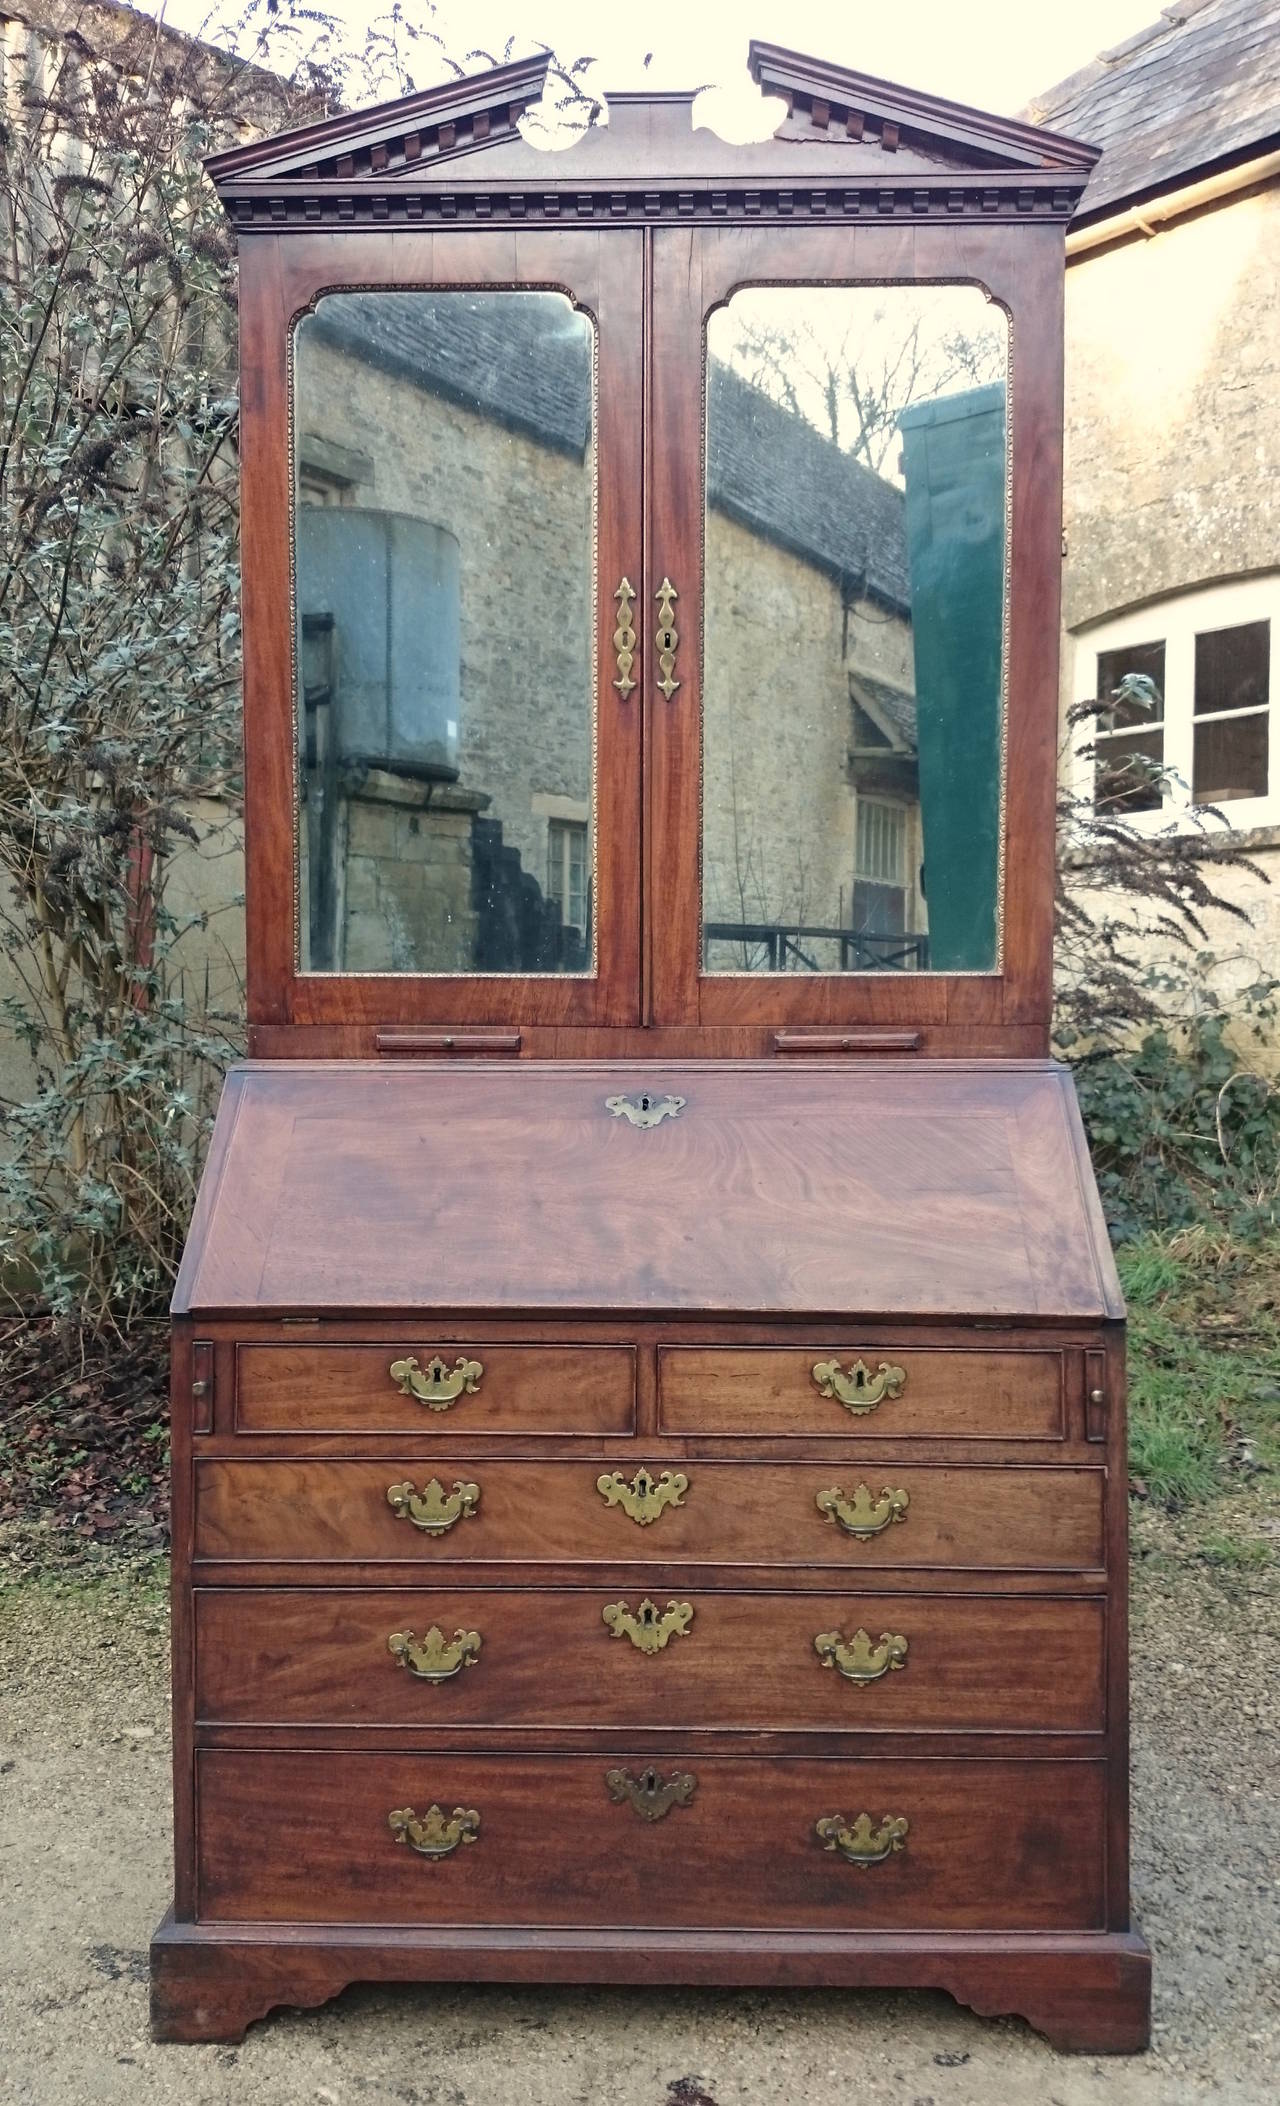 This 18th century antique bureau bookcase is made of an exceptionally fine cut of Cuban mahogany. The timber is really dense and has an especially interesting grain pattern. 
The construction is second to none, the interior is fitted out with many